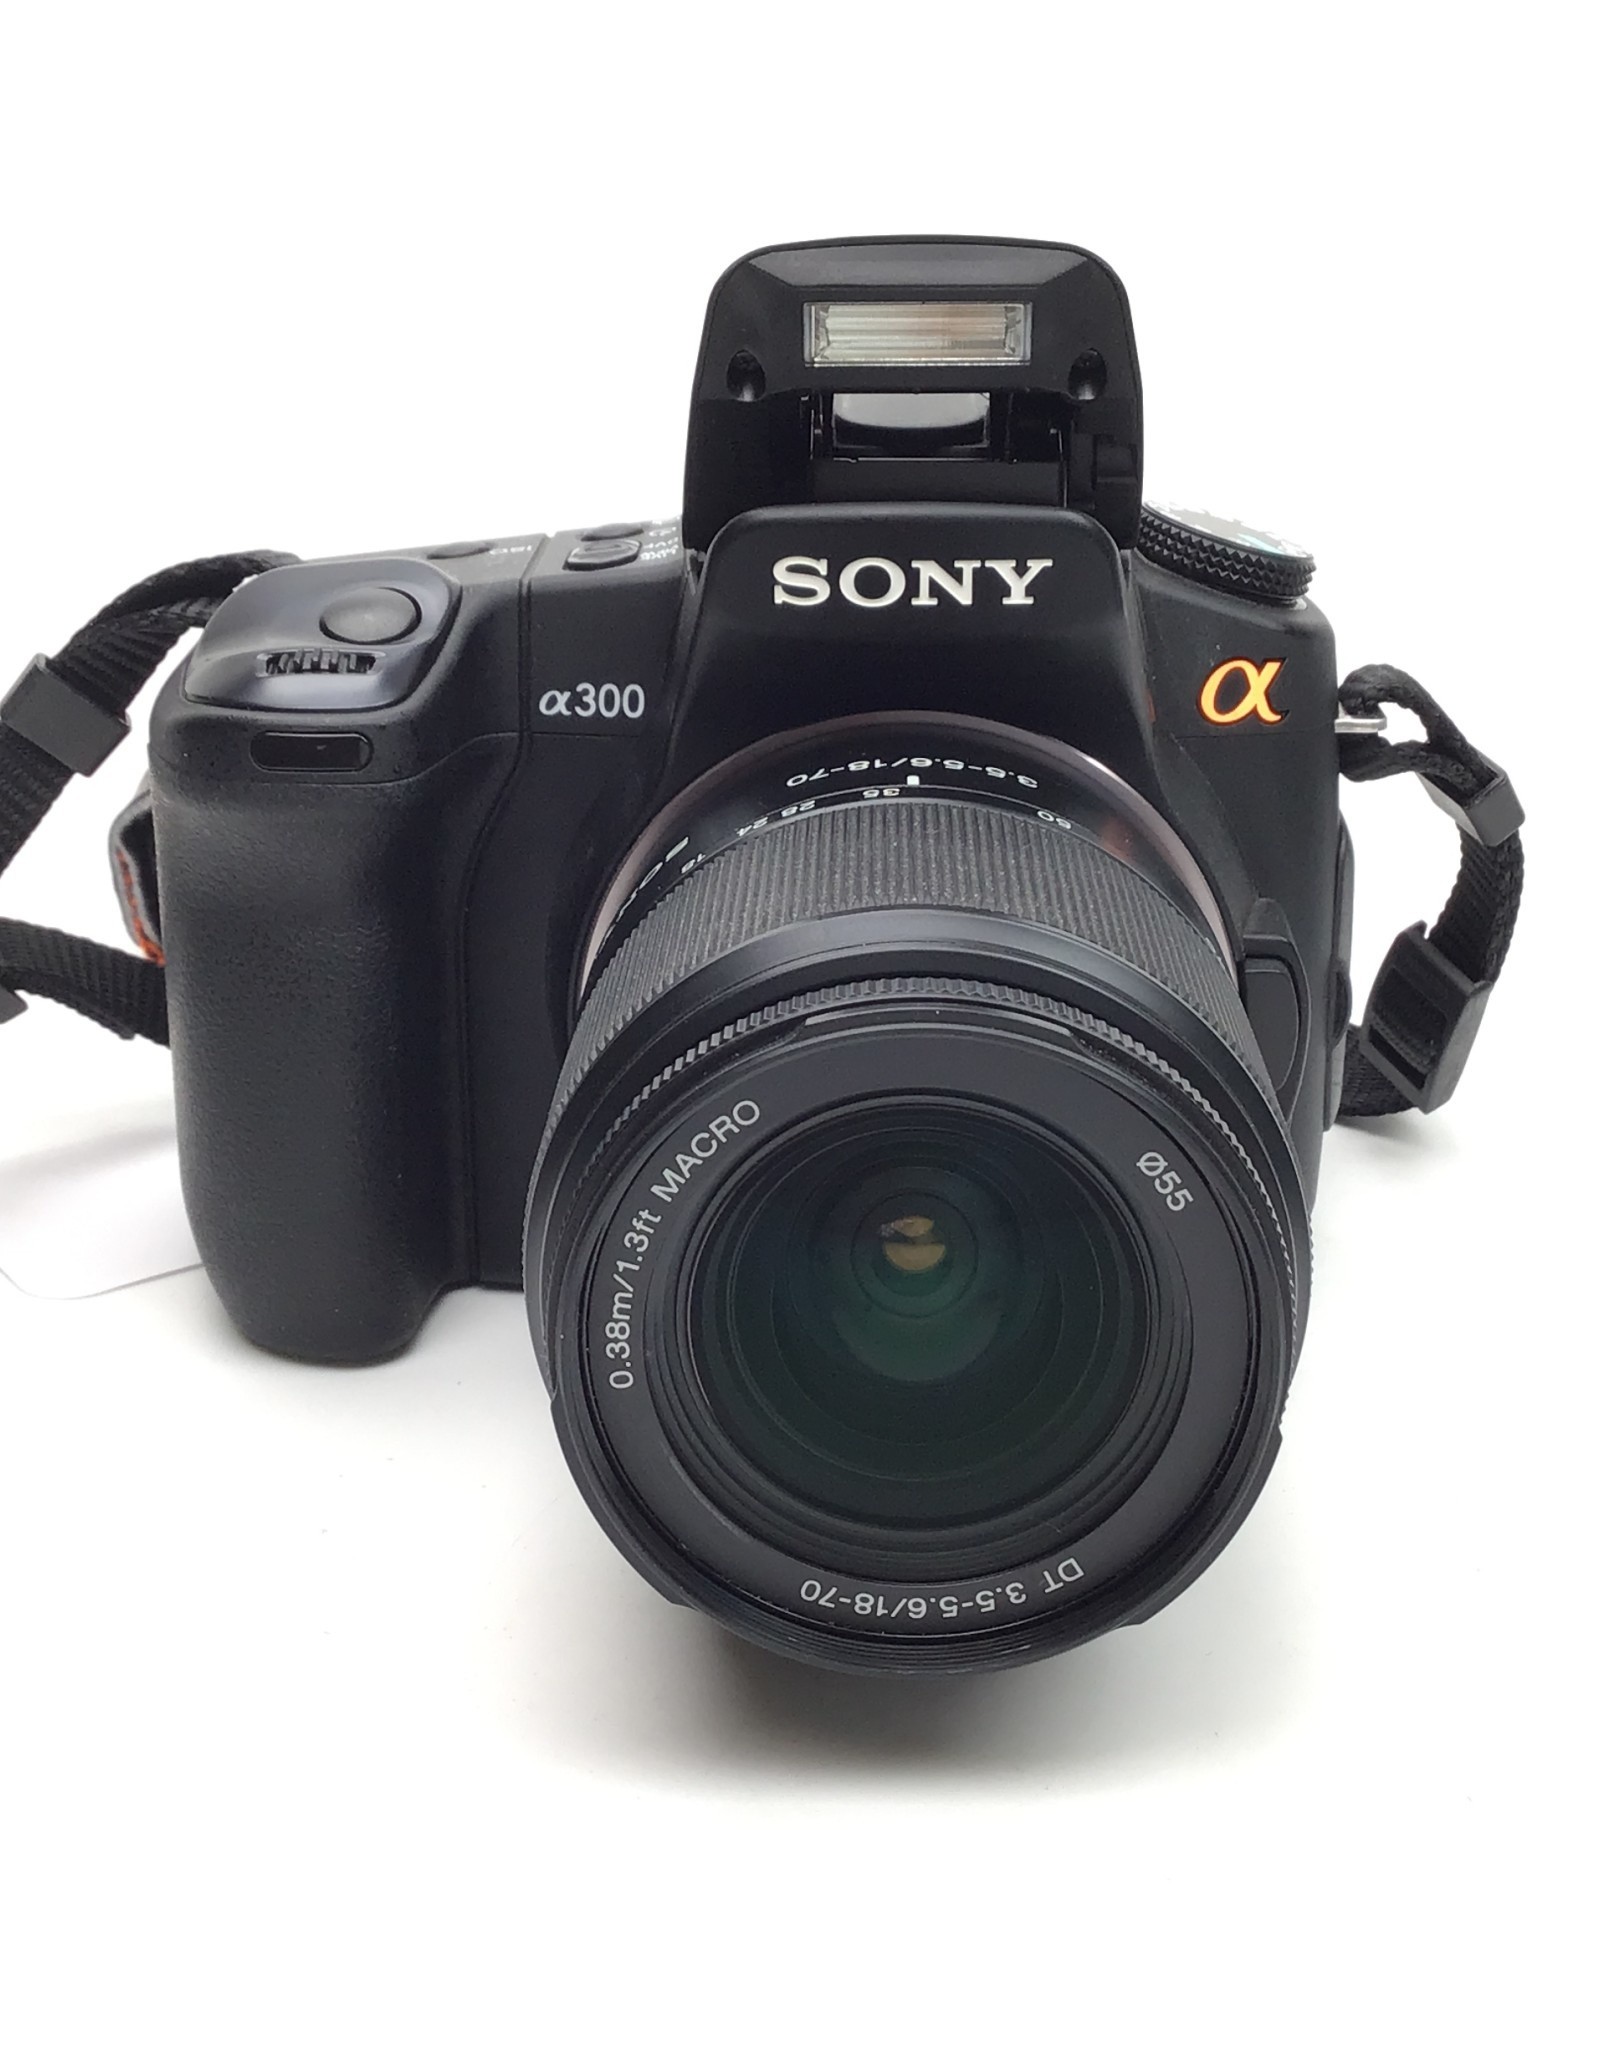 SONY Sony a300 Camera with 18-70mm Used Good